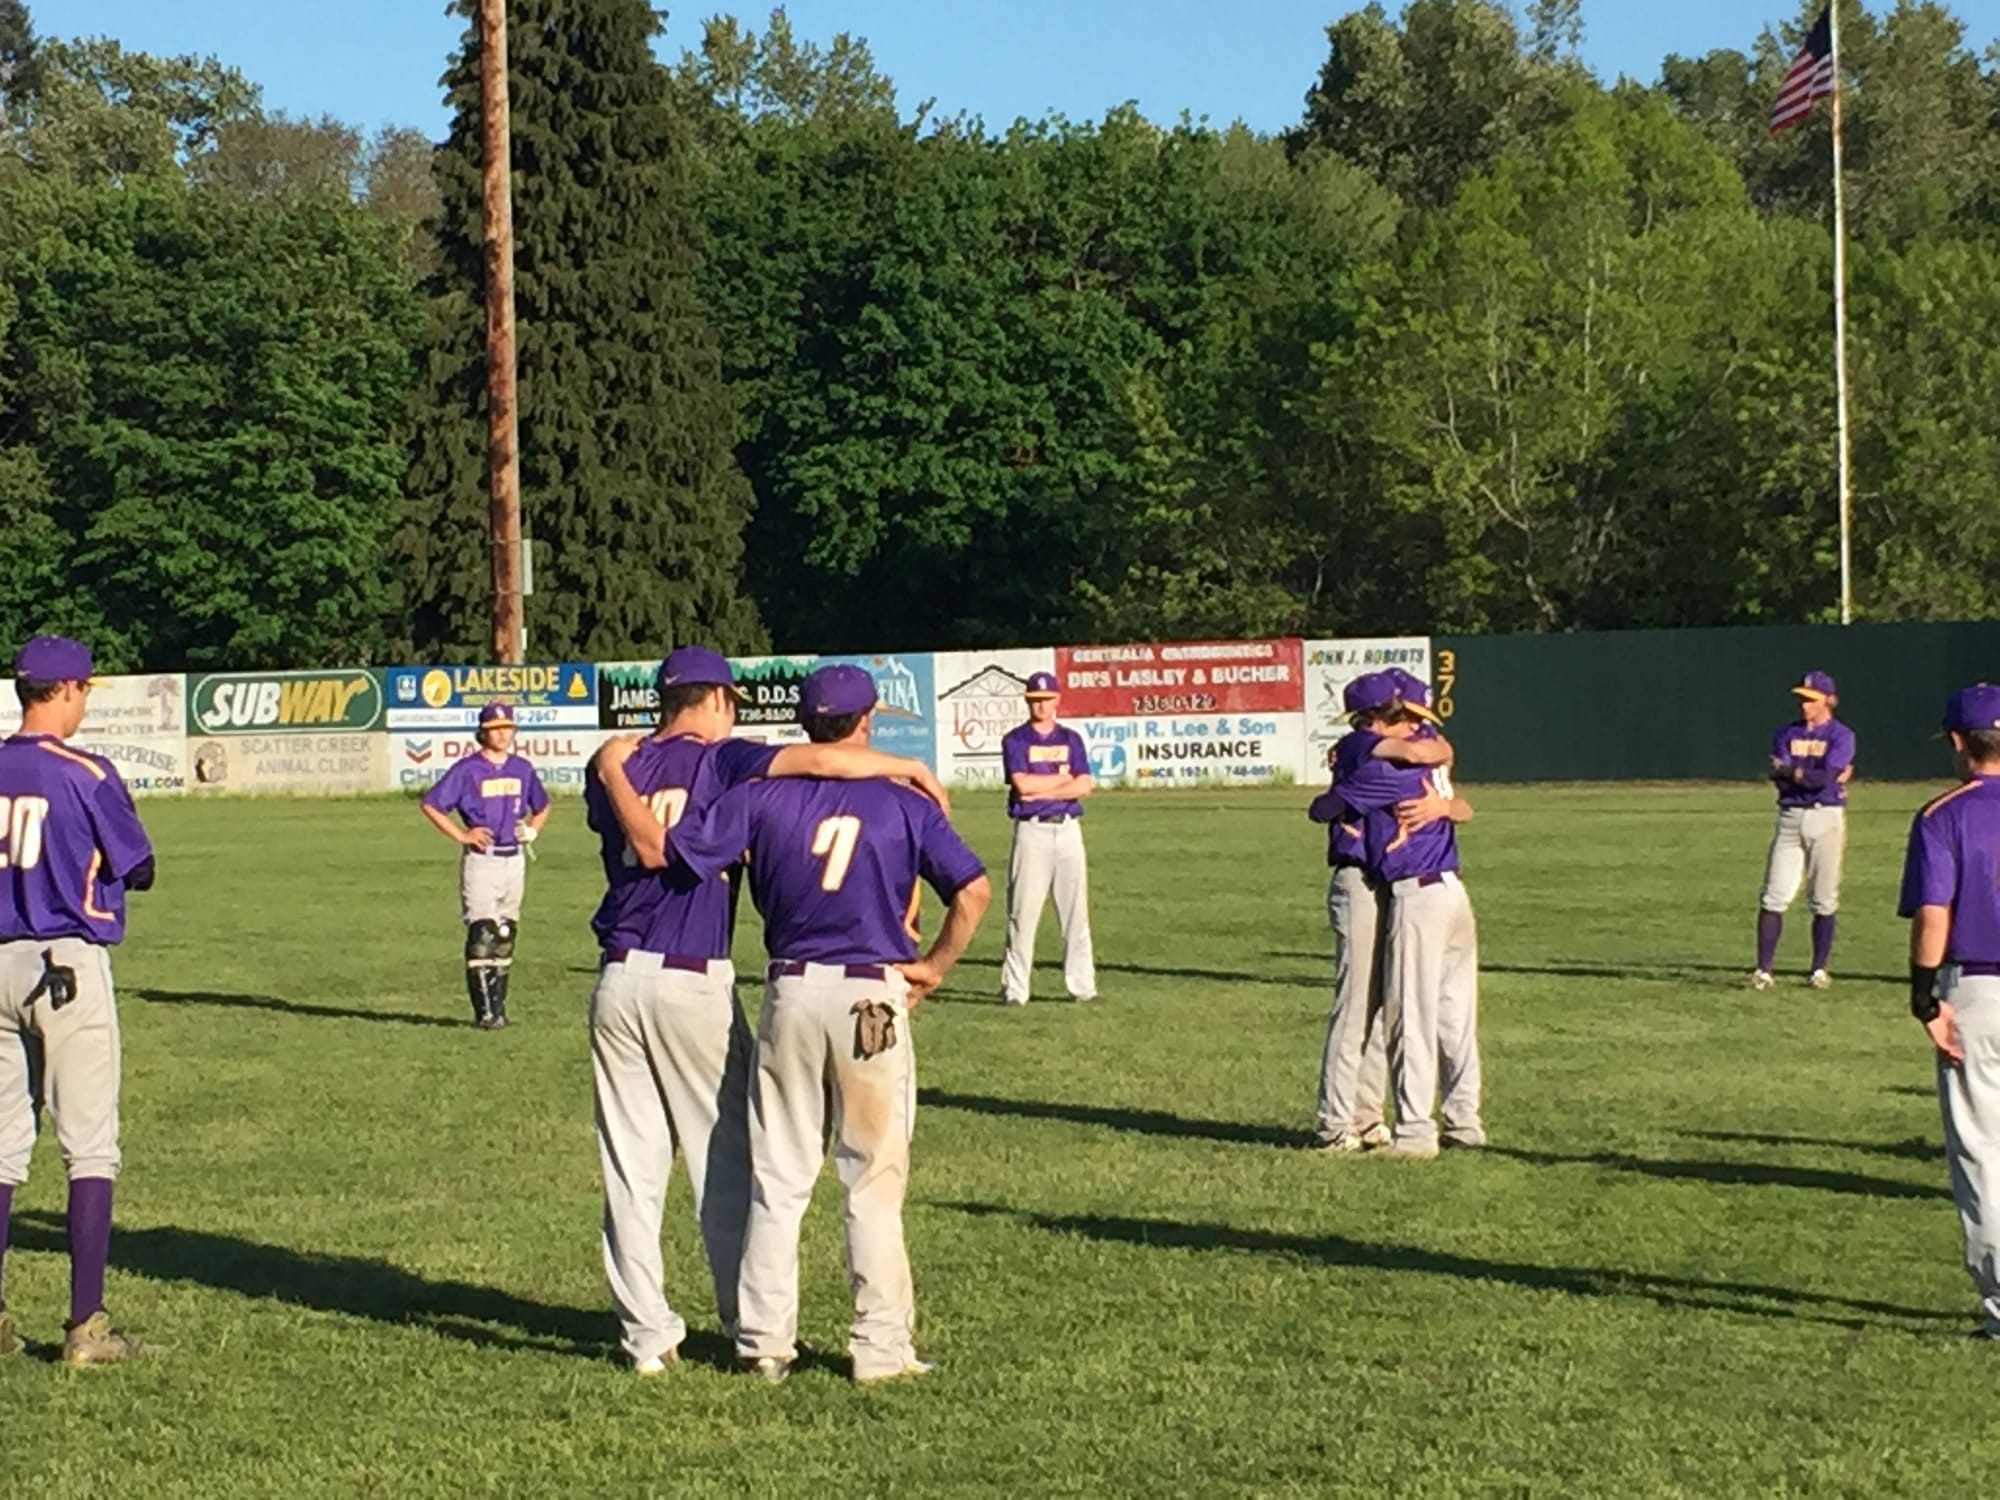 Members of the Columbia River baseball team hug after a 10-9 loss to W.F. West ended their season in the 2A state quarterfinals Saturday in Centralia.